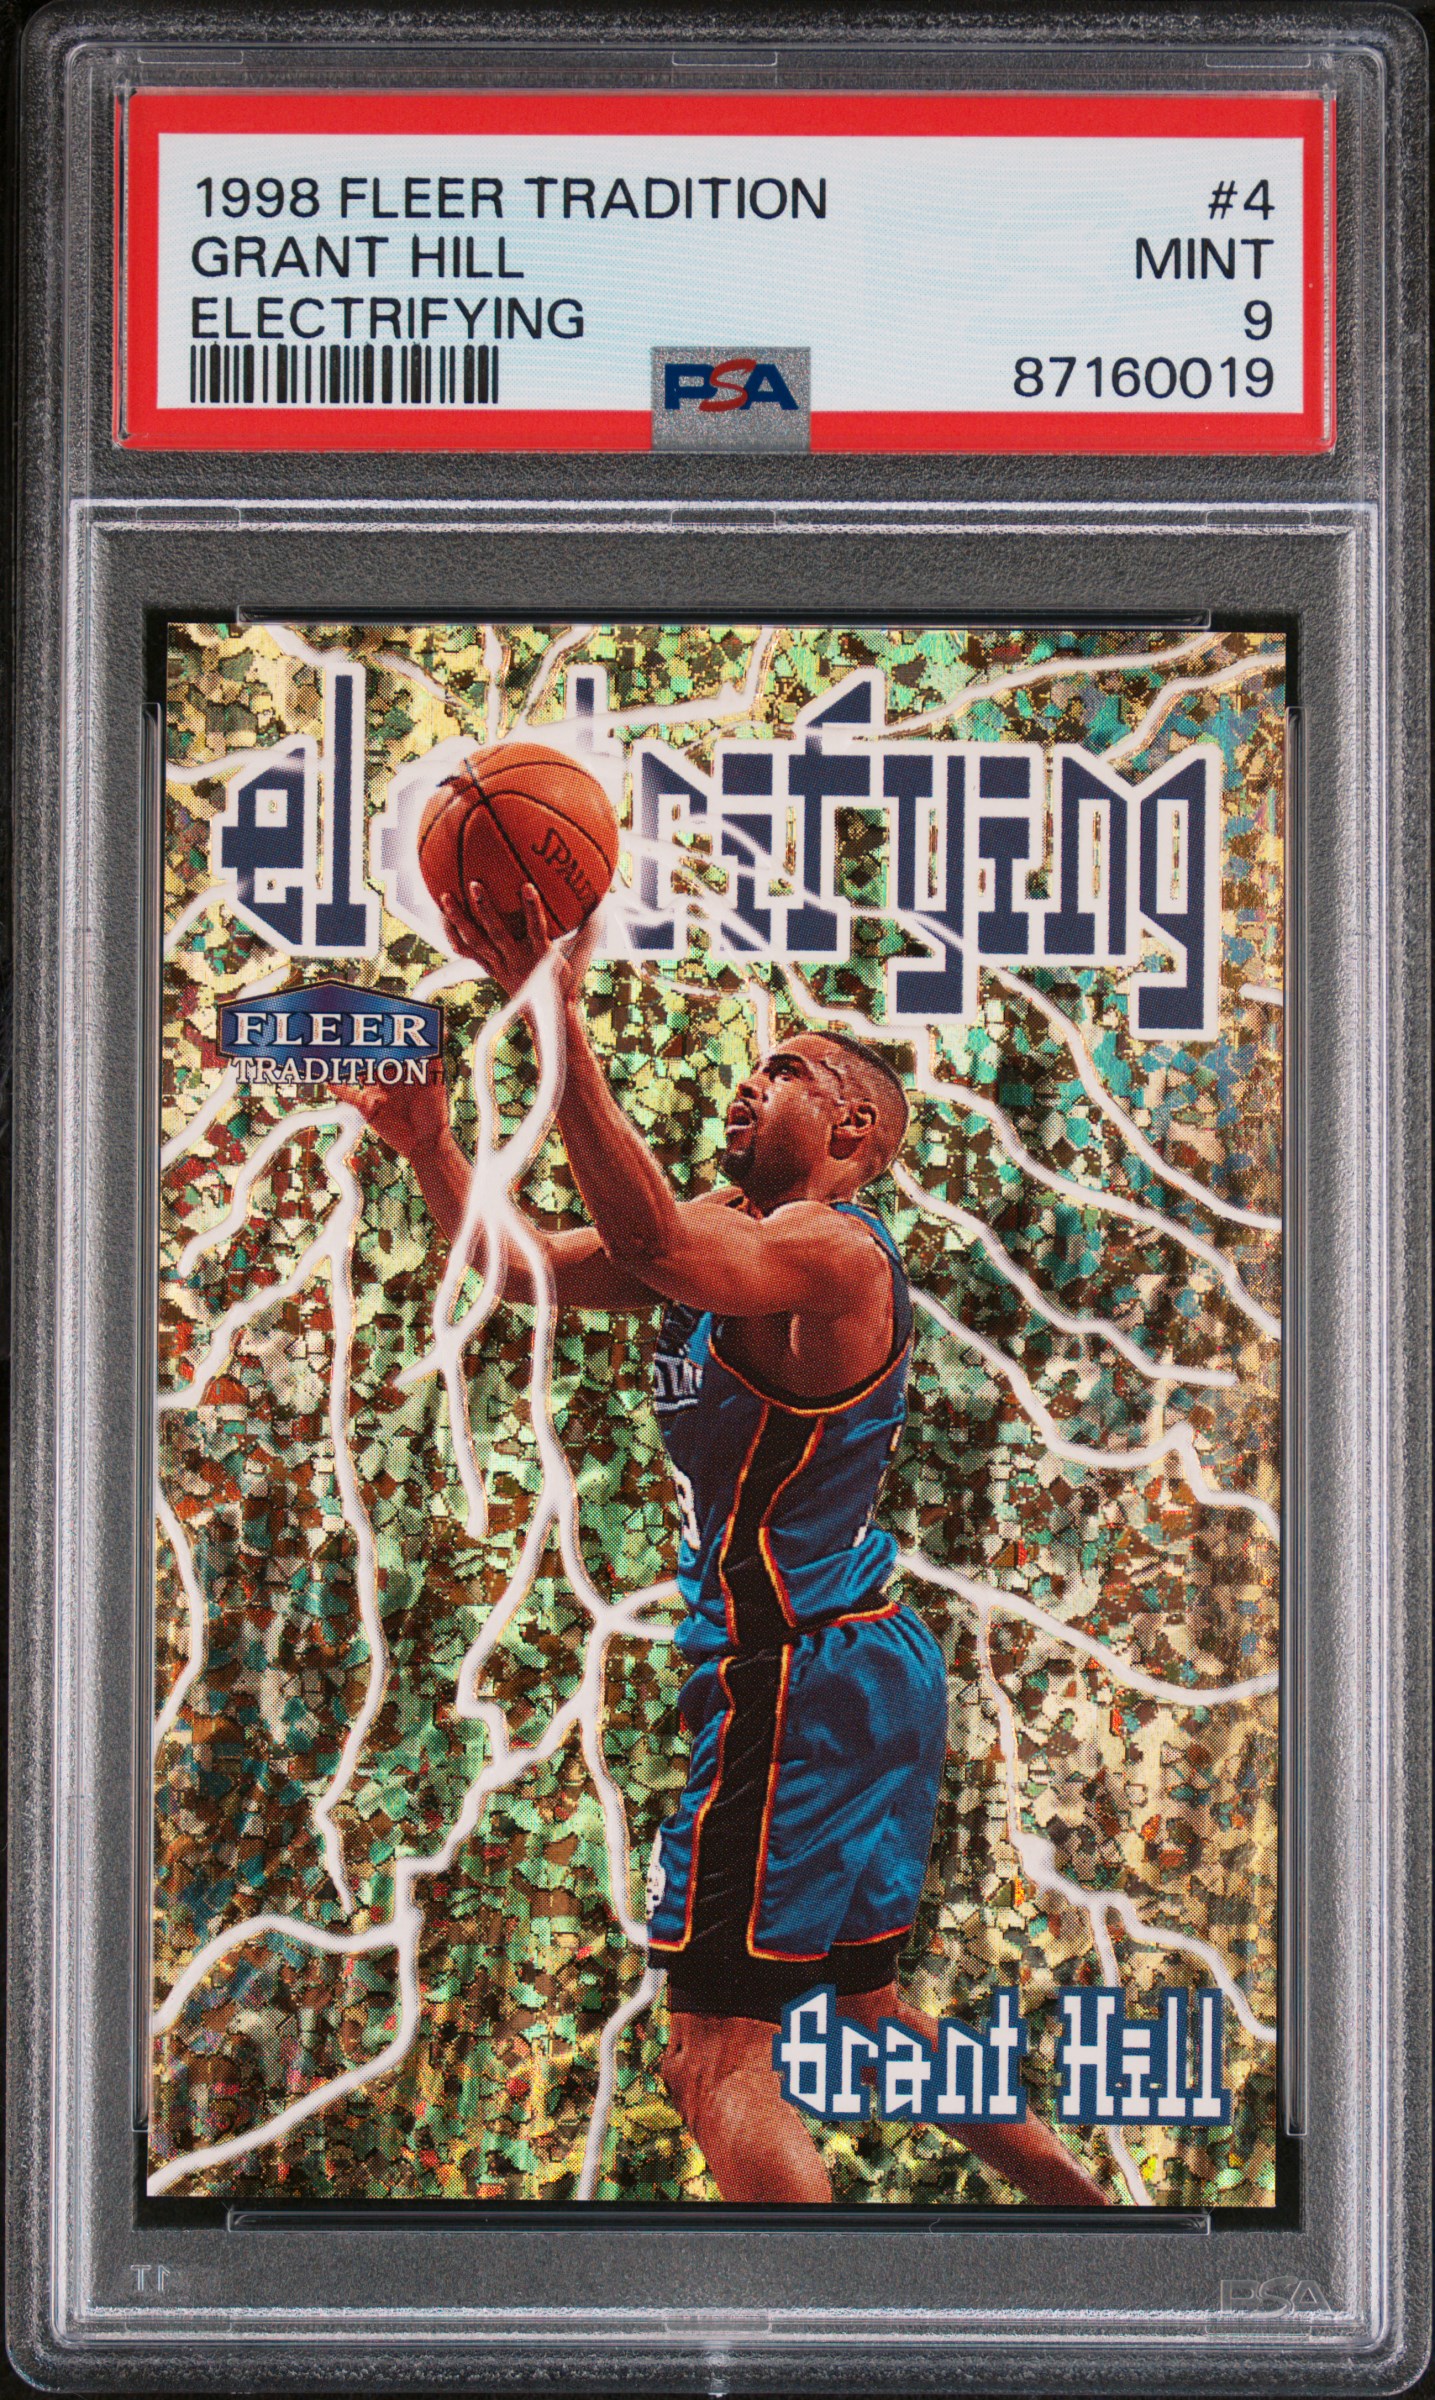 1998 Fleer Tradition Electrifying #4 Grant Hill – PSA MINT 9